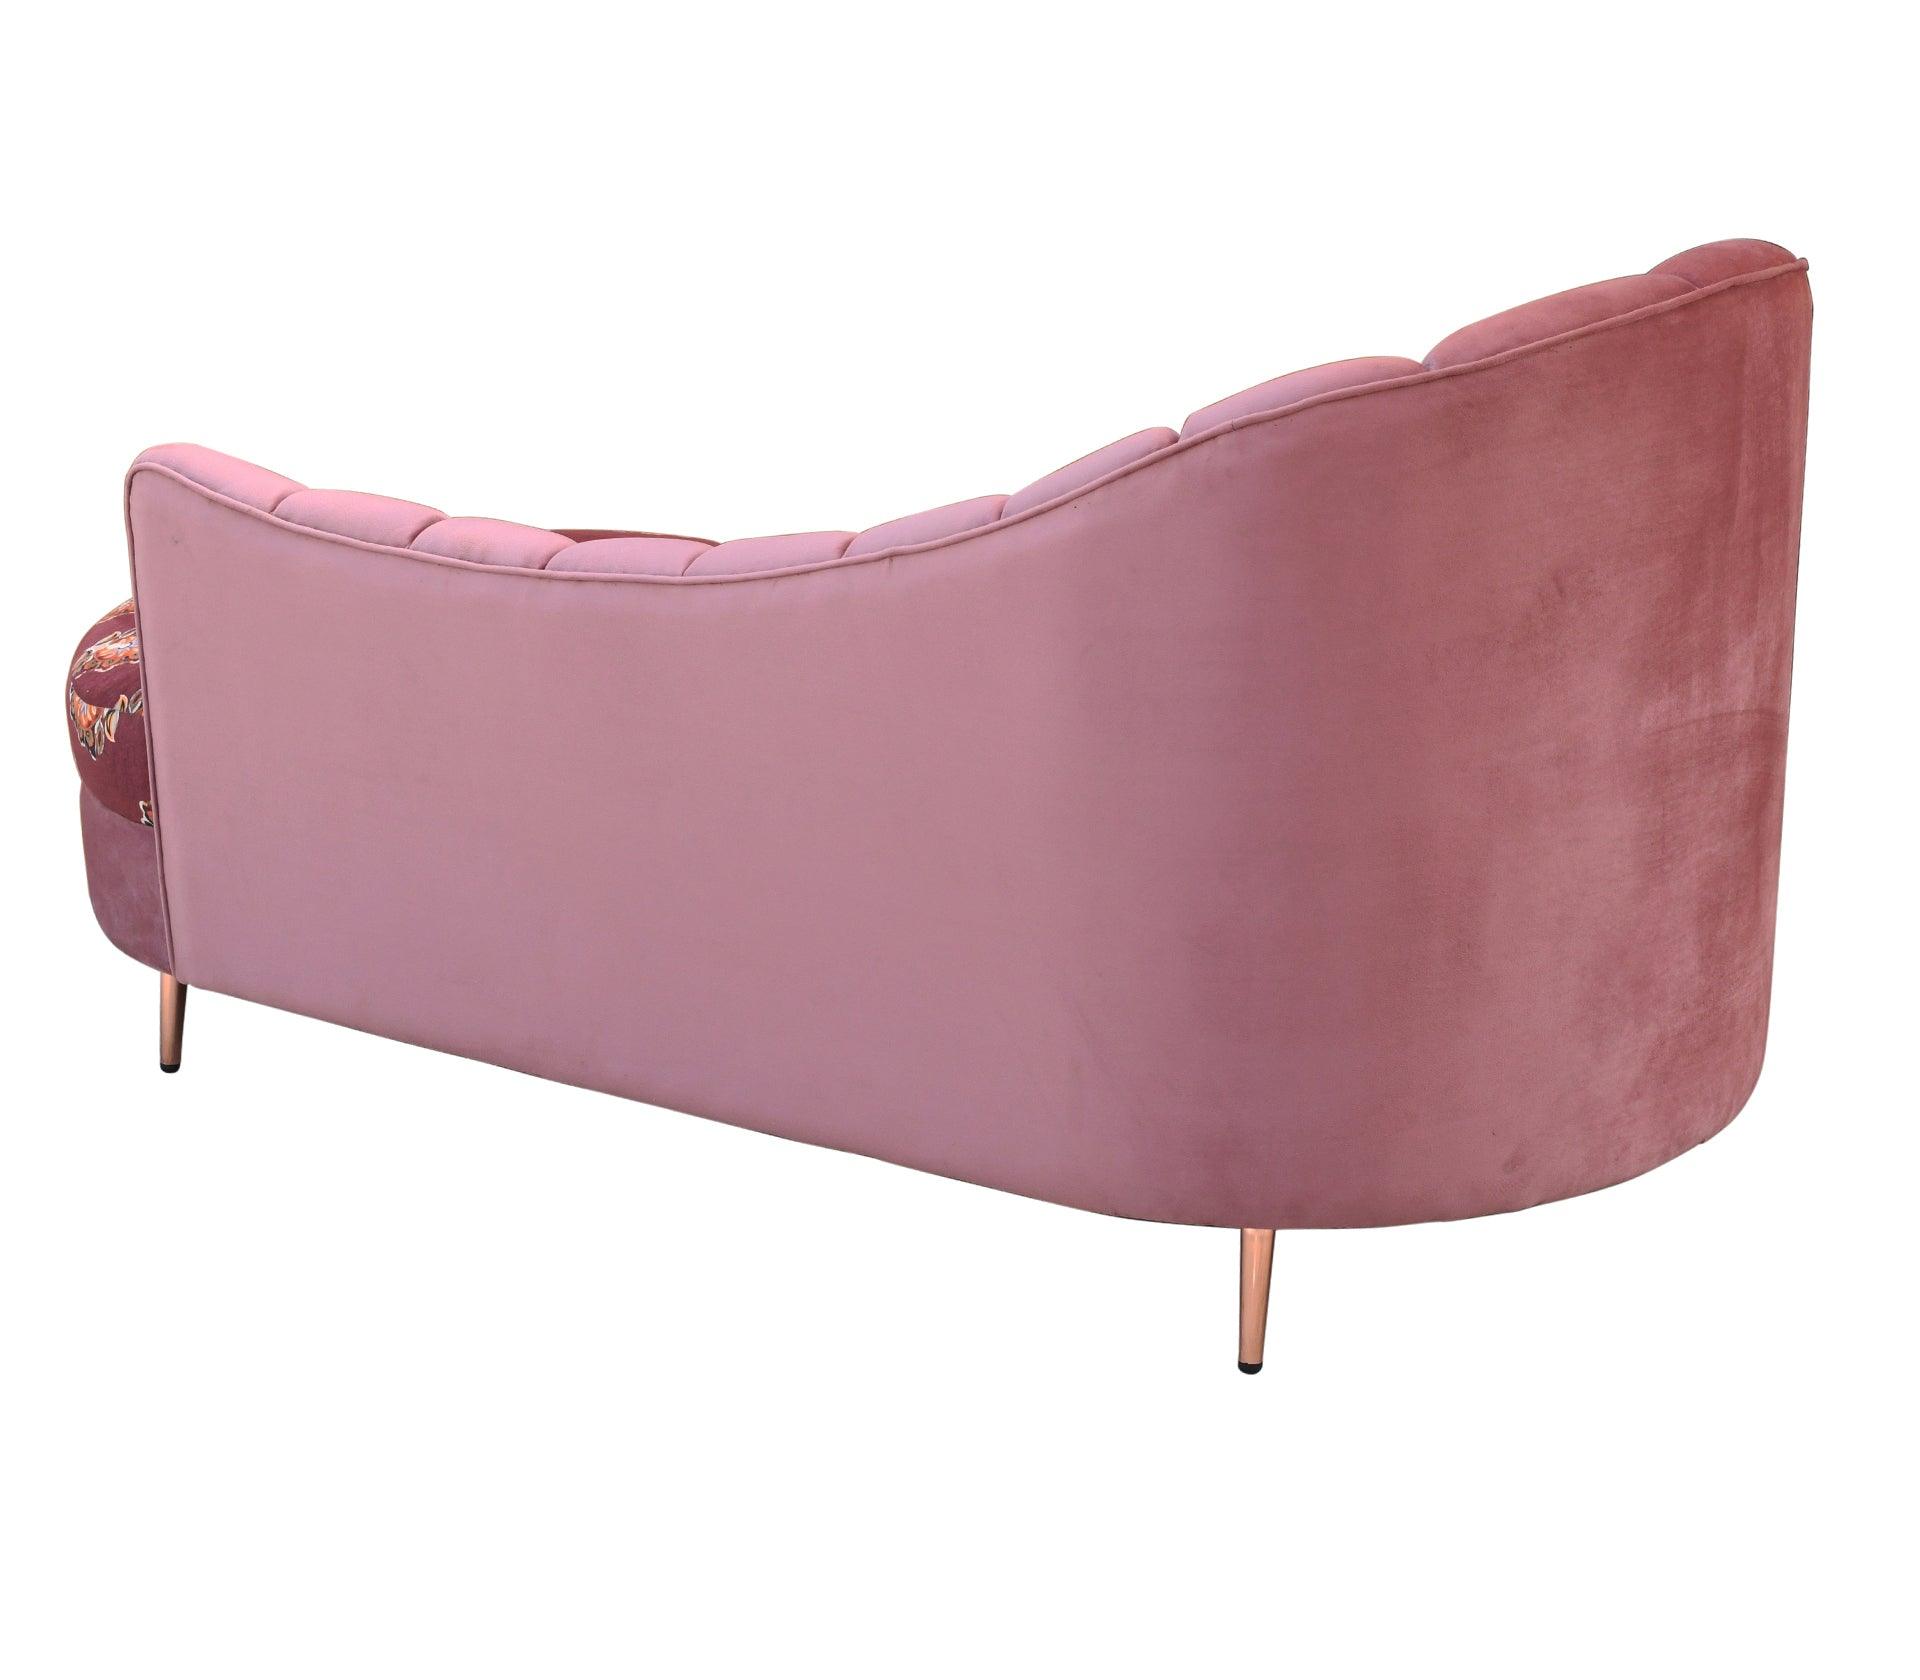 Flowral Sofa Chaise With Golden Legs - Furniture Castle